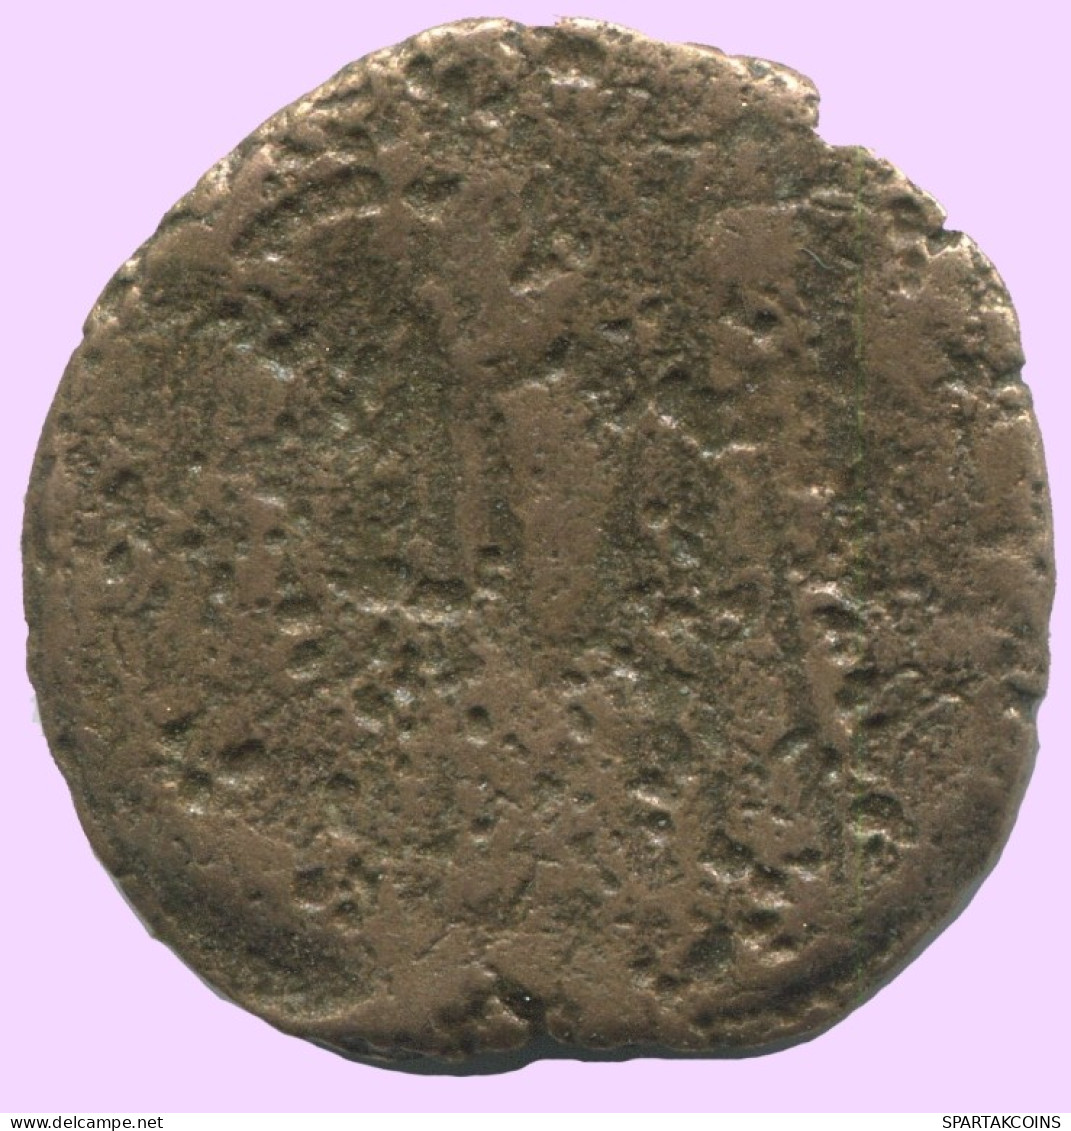 LATE ROMAN EMPIRE Follis Antique Authentique Roman Pièce 4g/20mm #ANT2141.7.F.A - The End Of Empire (363 AD To 476 AD)